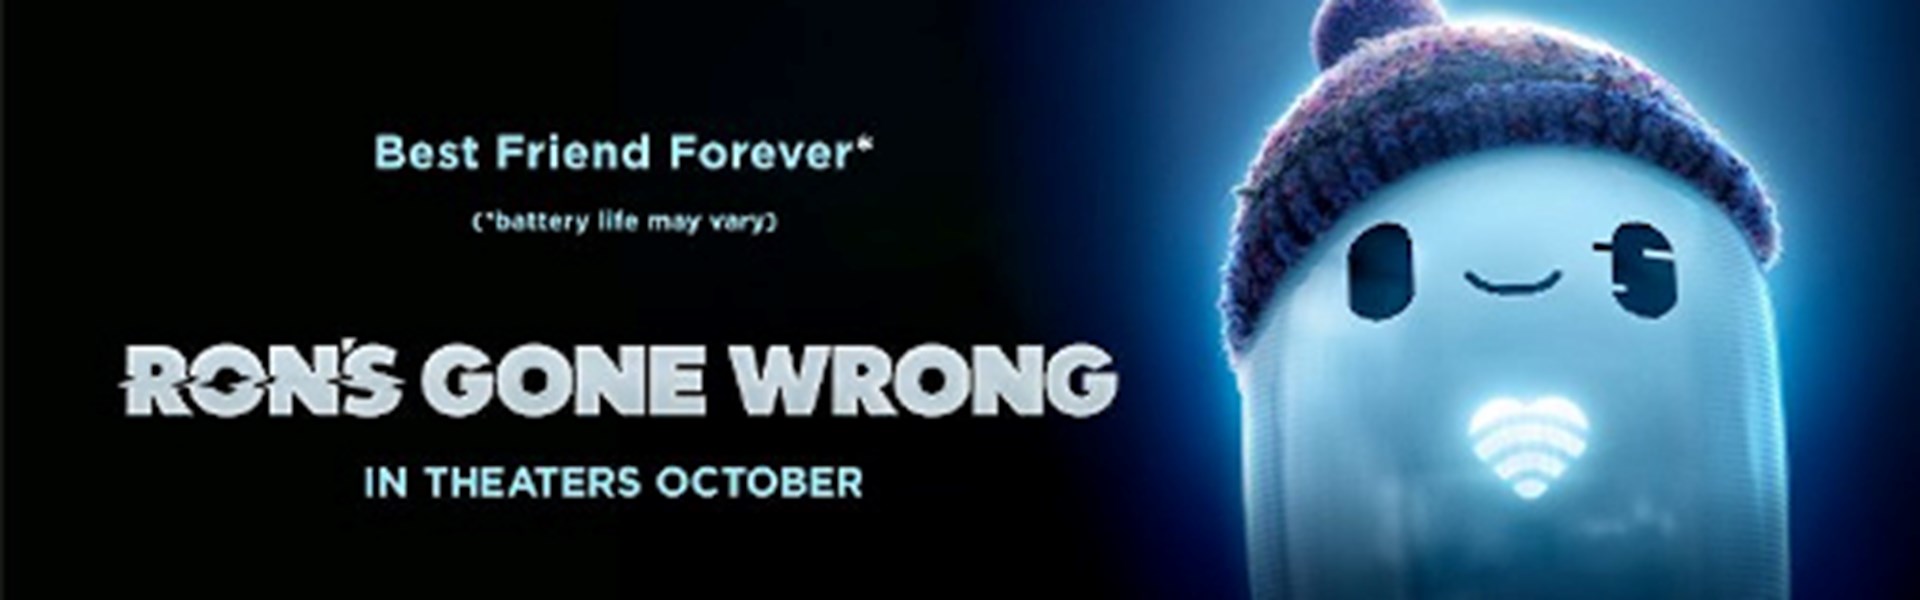 FILM: Ron's Gone Wrong (PG)